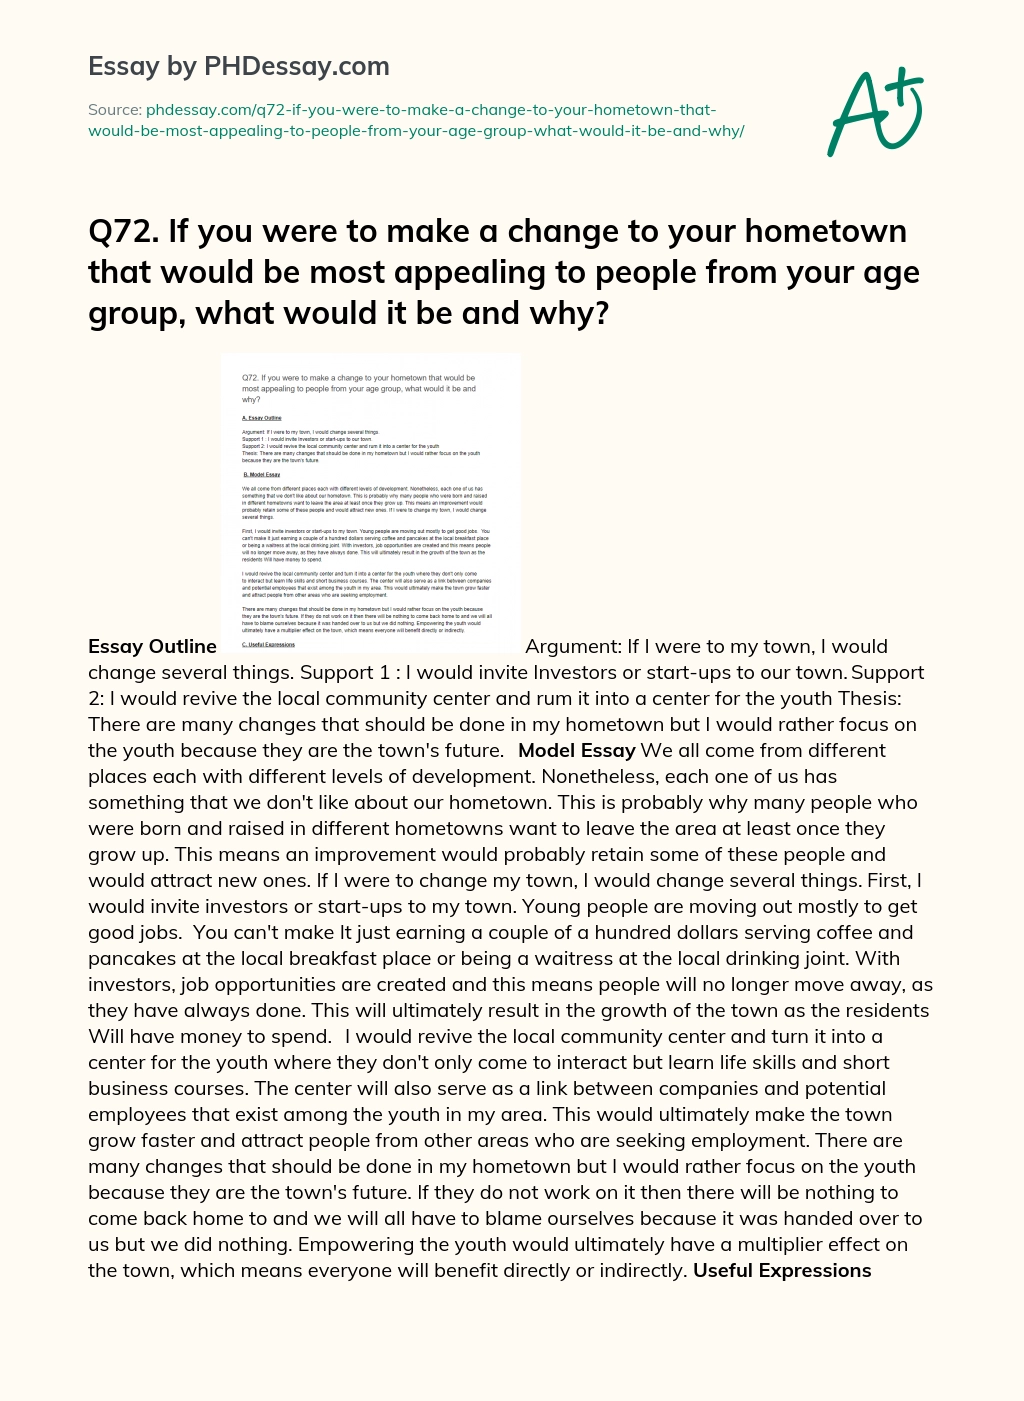 Q72. If you were to make a change to your hometown that would be most appealing to people from your age group, what would it be and why? essay